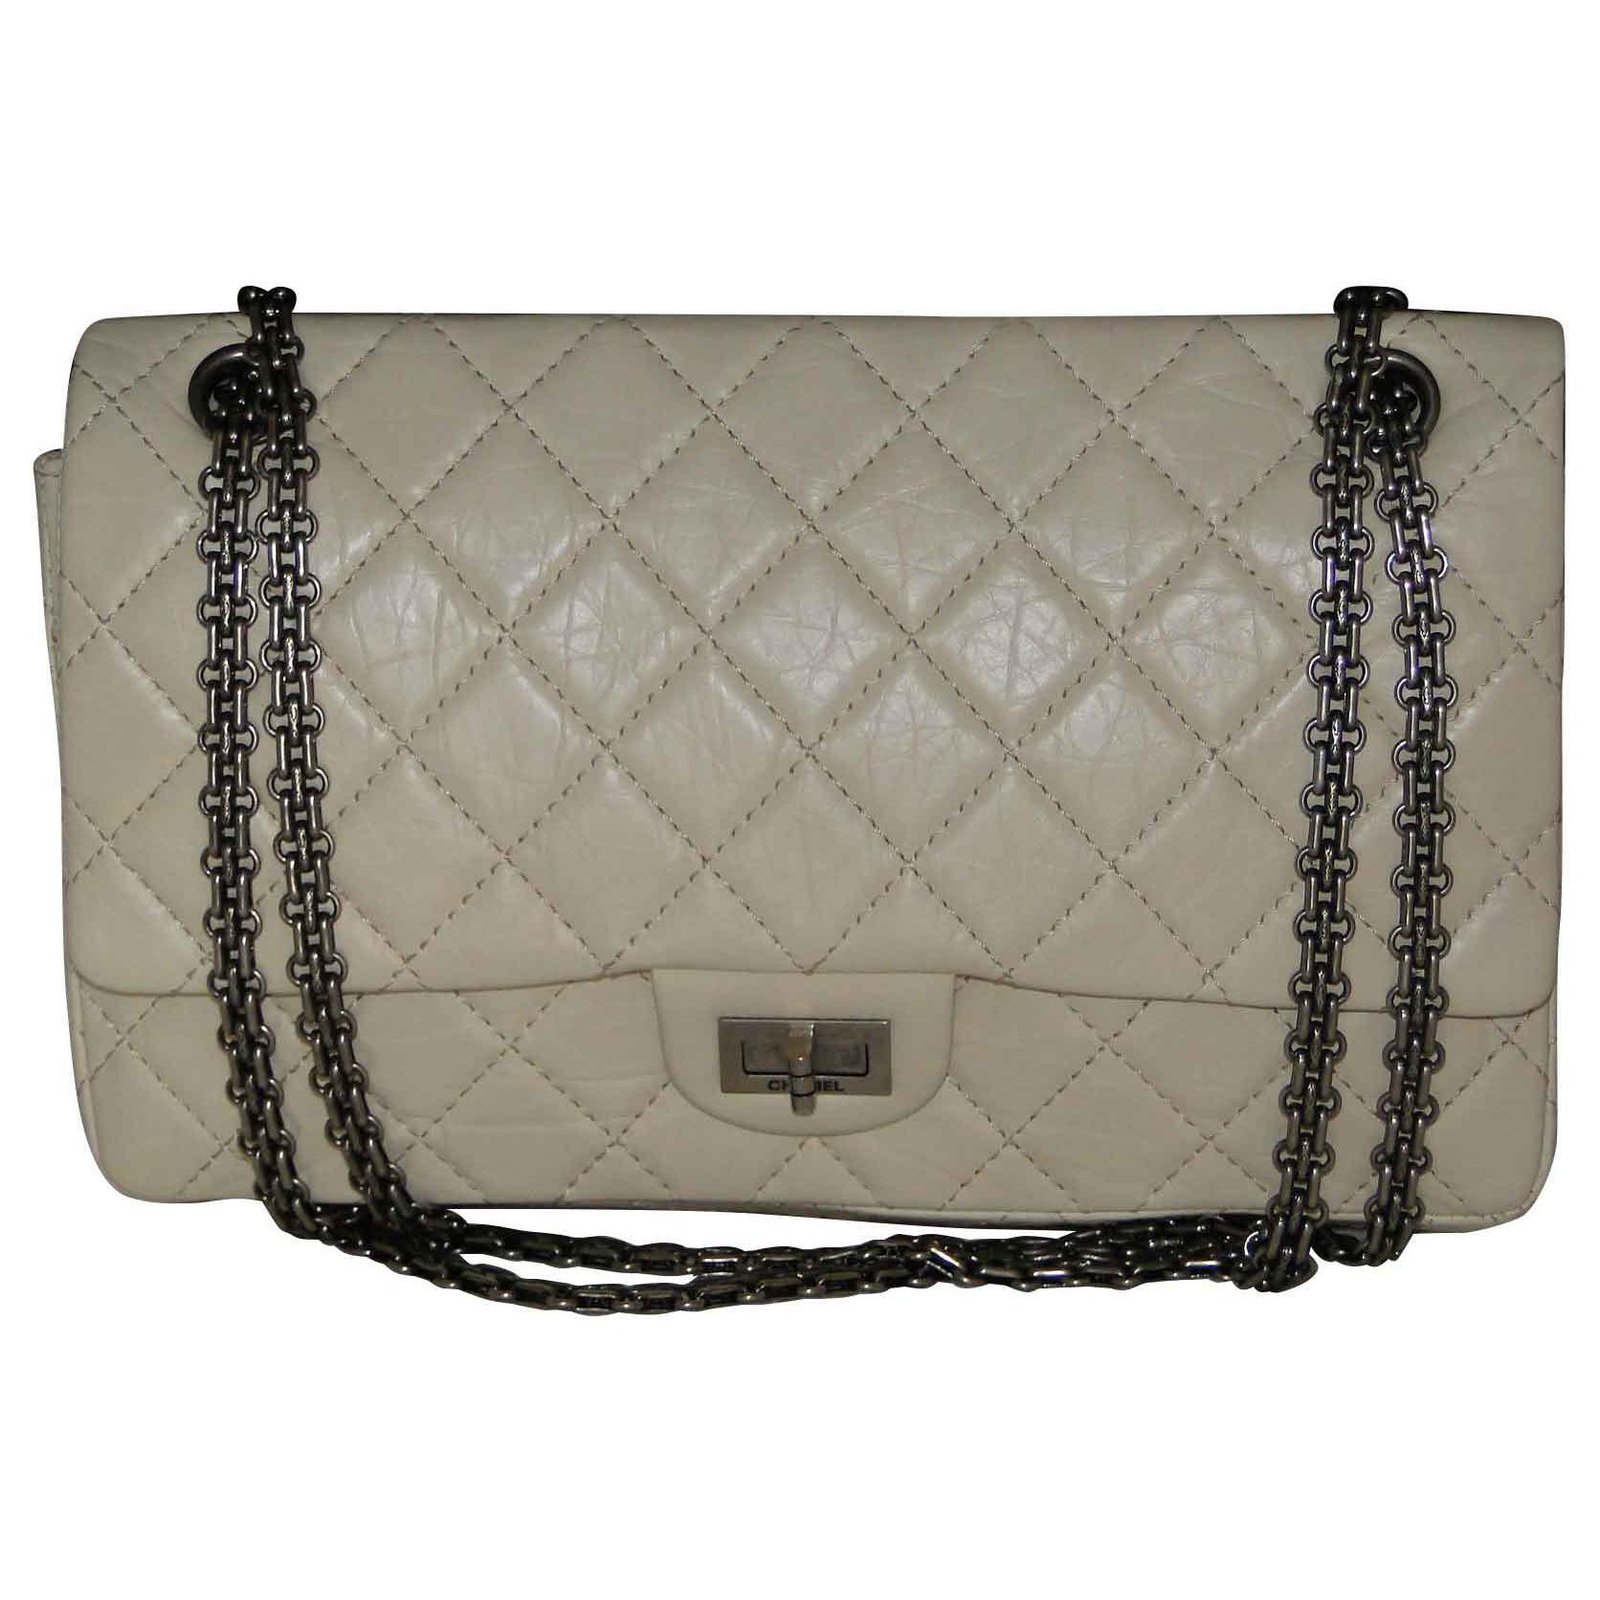 Chanel 2.55 lamb leather maxi Reissue 226